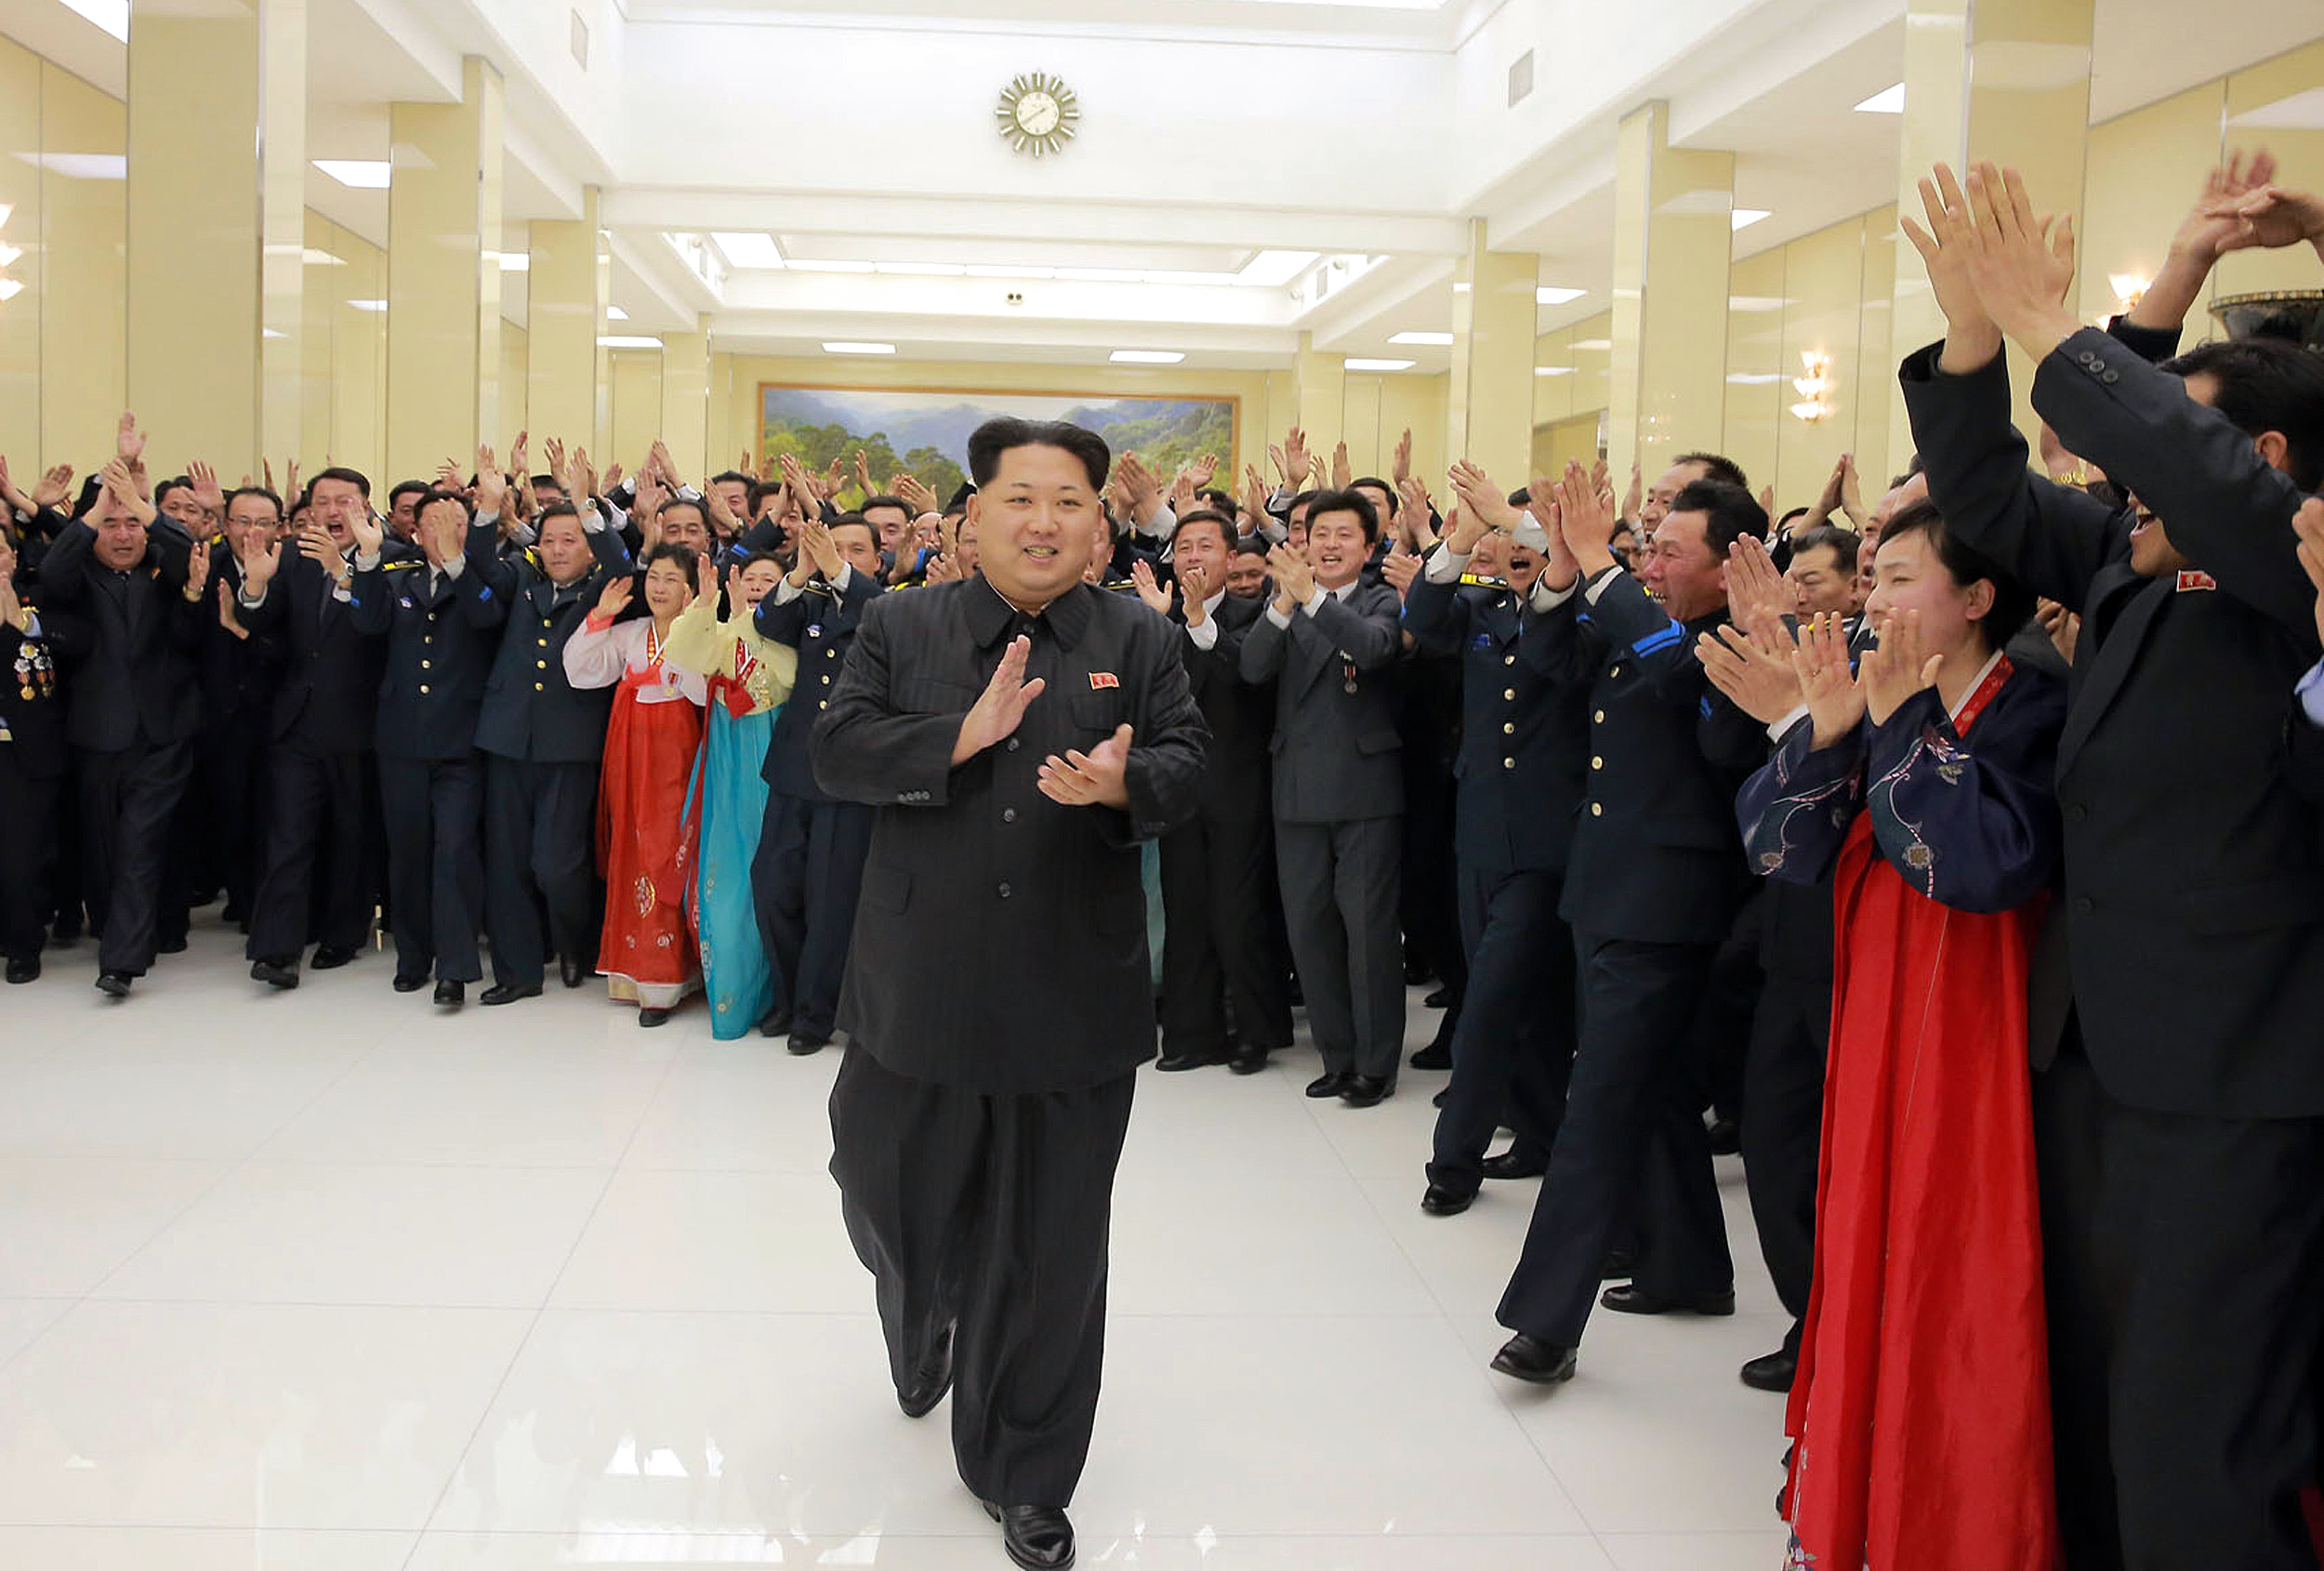 This photo taken on February 13, 2016 and released by North Korea's official Korean Central News Agency (KCNA) on February 15, 2016 shows North Korean leader Kim Jong-Un (C) being welcomed by people during a party for scientists who contributed to the launch of the earth observation satellite Kwangmyong in Pyongyang.  It was reported on February 15 that North Korean leader Kim Jong-Un has promised to put more satellites in space, even as the international community prepares to punish his regime over a long-range rocket launch just last week.        REPUBLIC OF KOREA OUT ----  AFP PHOTO / KCNA via KNS THIS PICTURE WAS MADE AVAILABLE BY A THIRD PARTY. AFP CAN NOT INDEPENDENTLY VERIFY THE AUTHENTICITY, LOCATION, DATE AND CONTENT OF THIS IMAGE. THIS PHOTO IS DISTRIBUTED EXACTLY AS RECEIVED BY AFP.  ---EDITORS NOTE--- RESTRICTED TO EDITORIAL USE - MANDATORY CREDIT "AFP PHOTO/KCNA VIA KNS" - NO MARKETING NO ADVERTISING CAMPAIGNS - DISTRIBUTED AS A SERVICE TO CLIENTS / AFP / KCNA / KNS